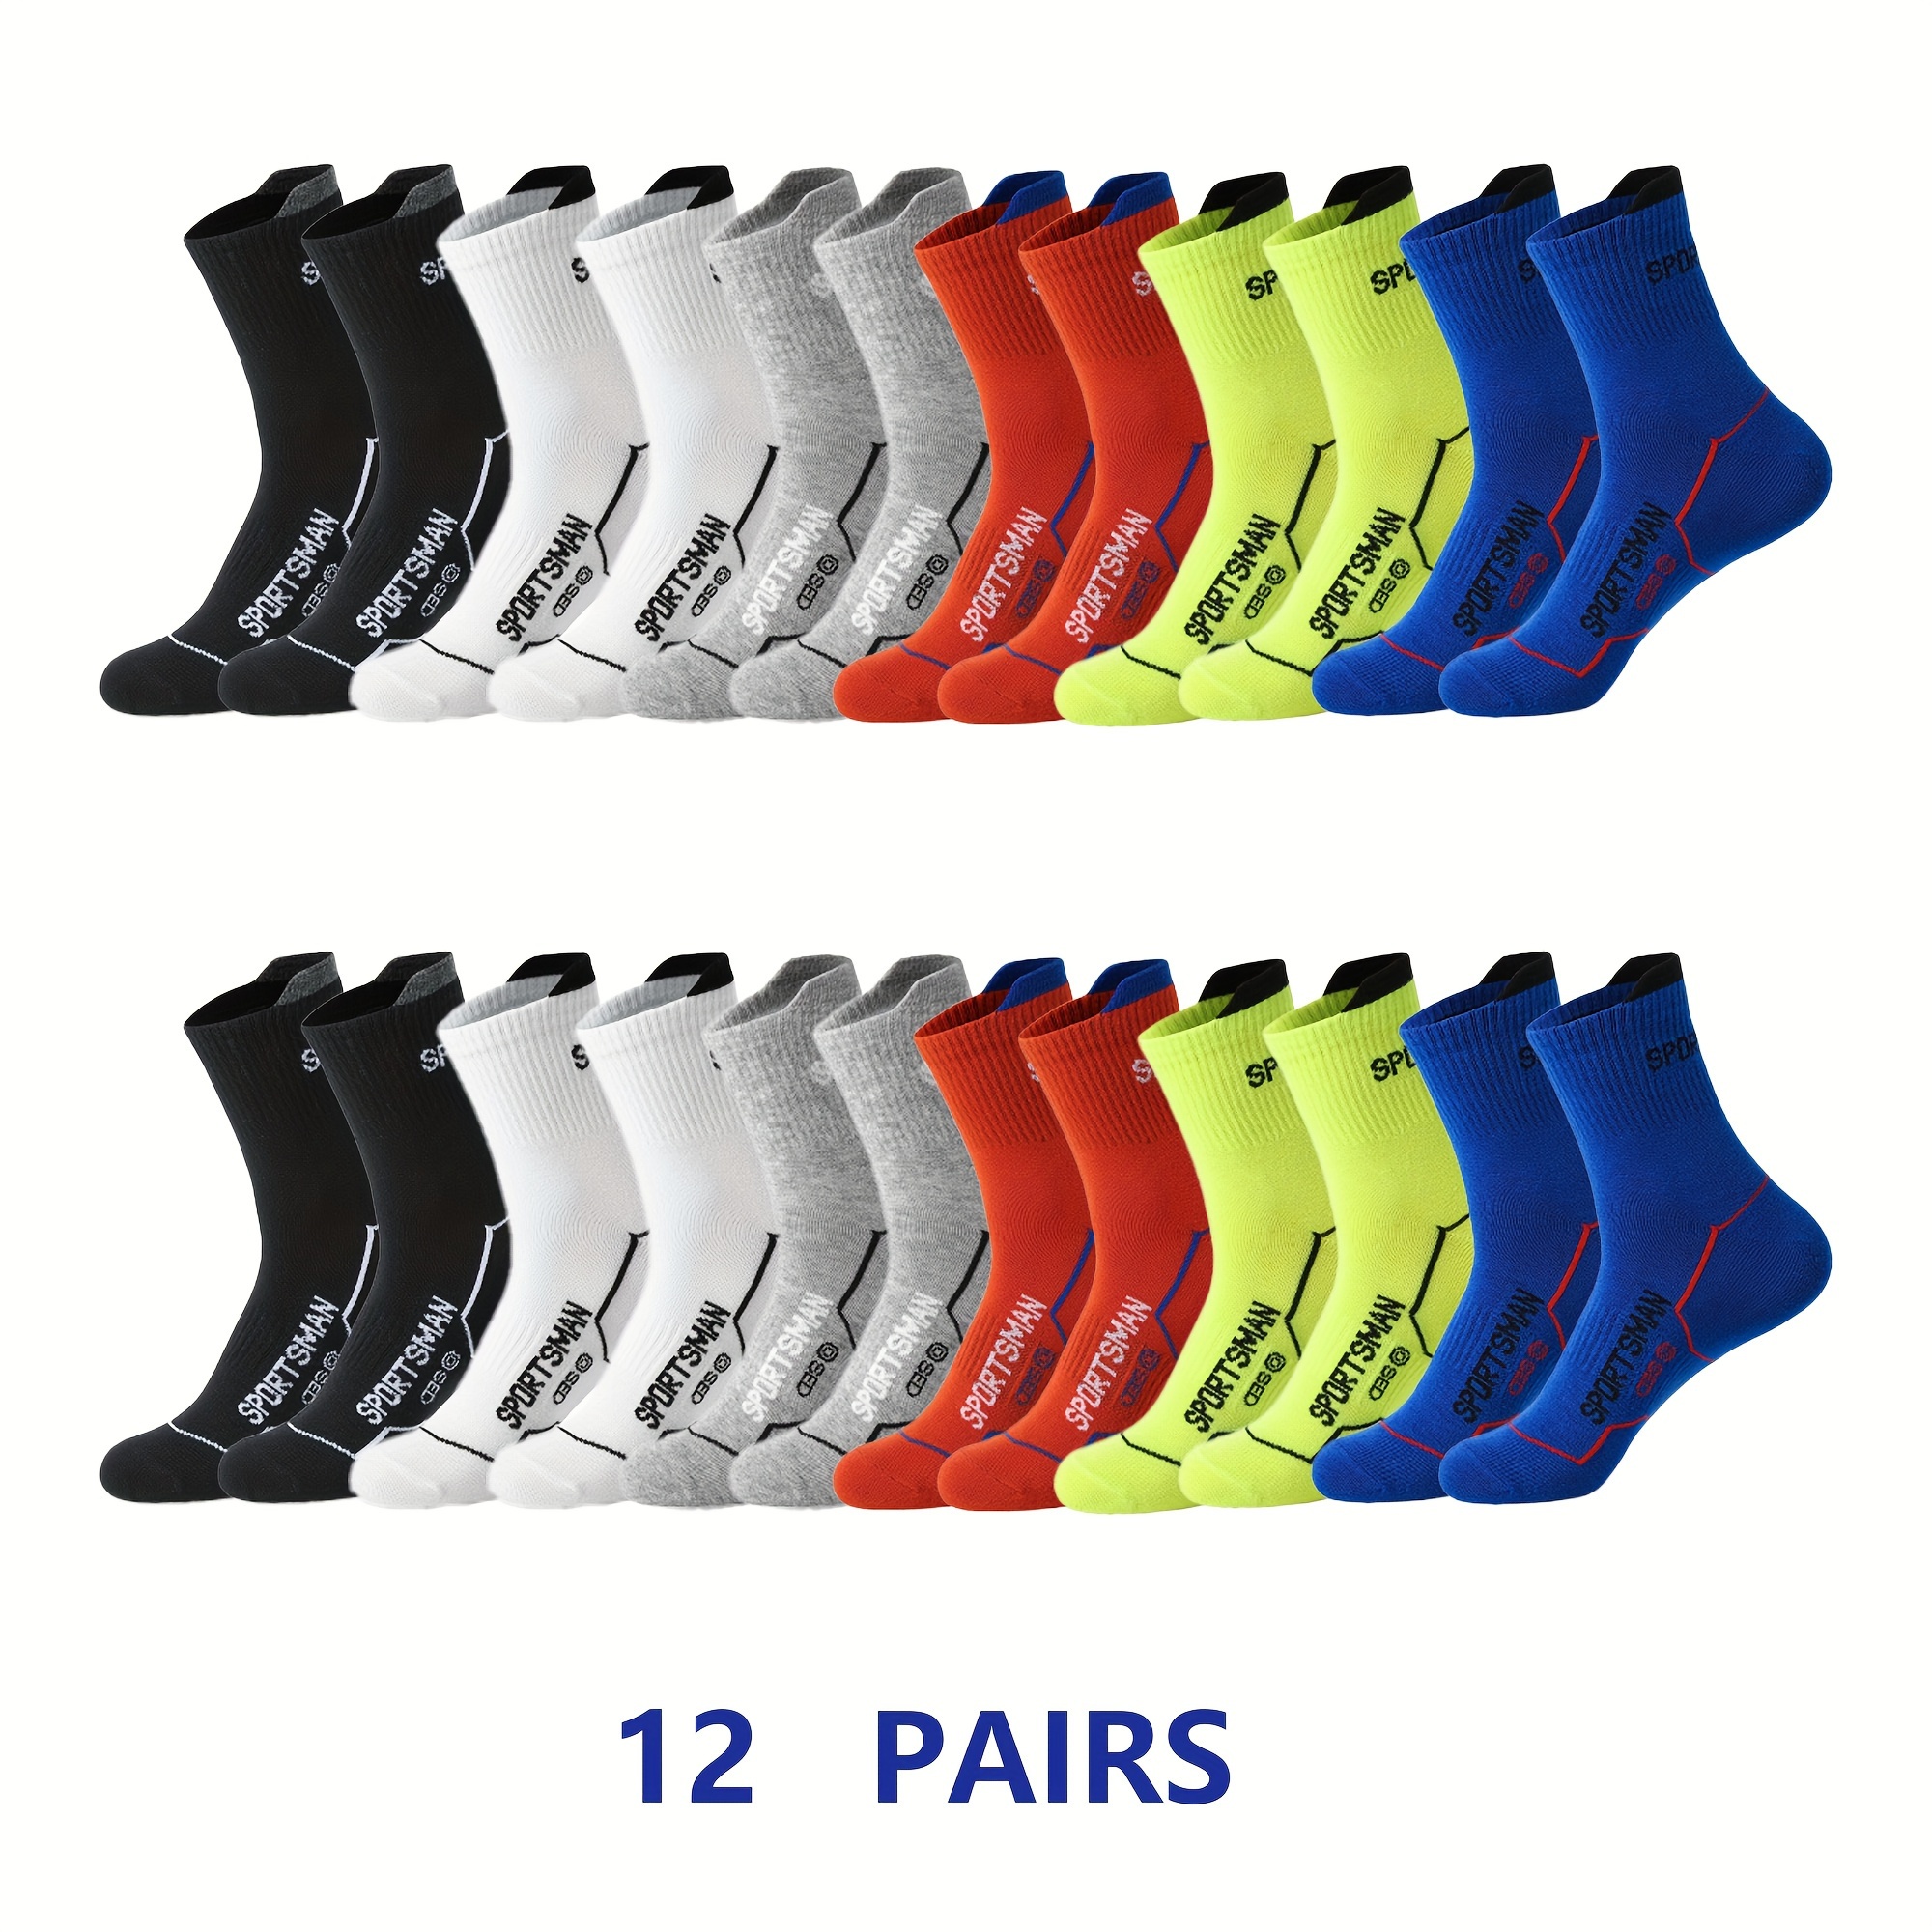 

12 Pairs Men's Mid-calf Athletic Socks, Moisture-wicking Anti-odor Crew Socks For Running, Cycling, Fitness, Basketball, Outdoor, Hiking - Assorted Colors